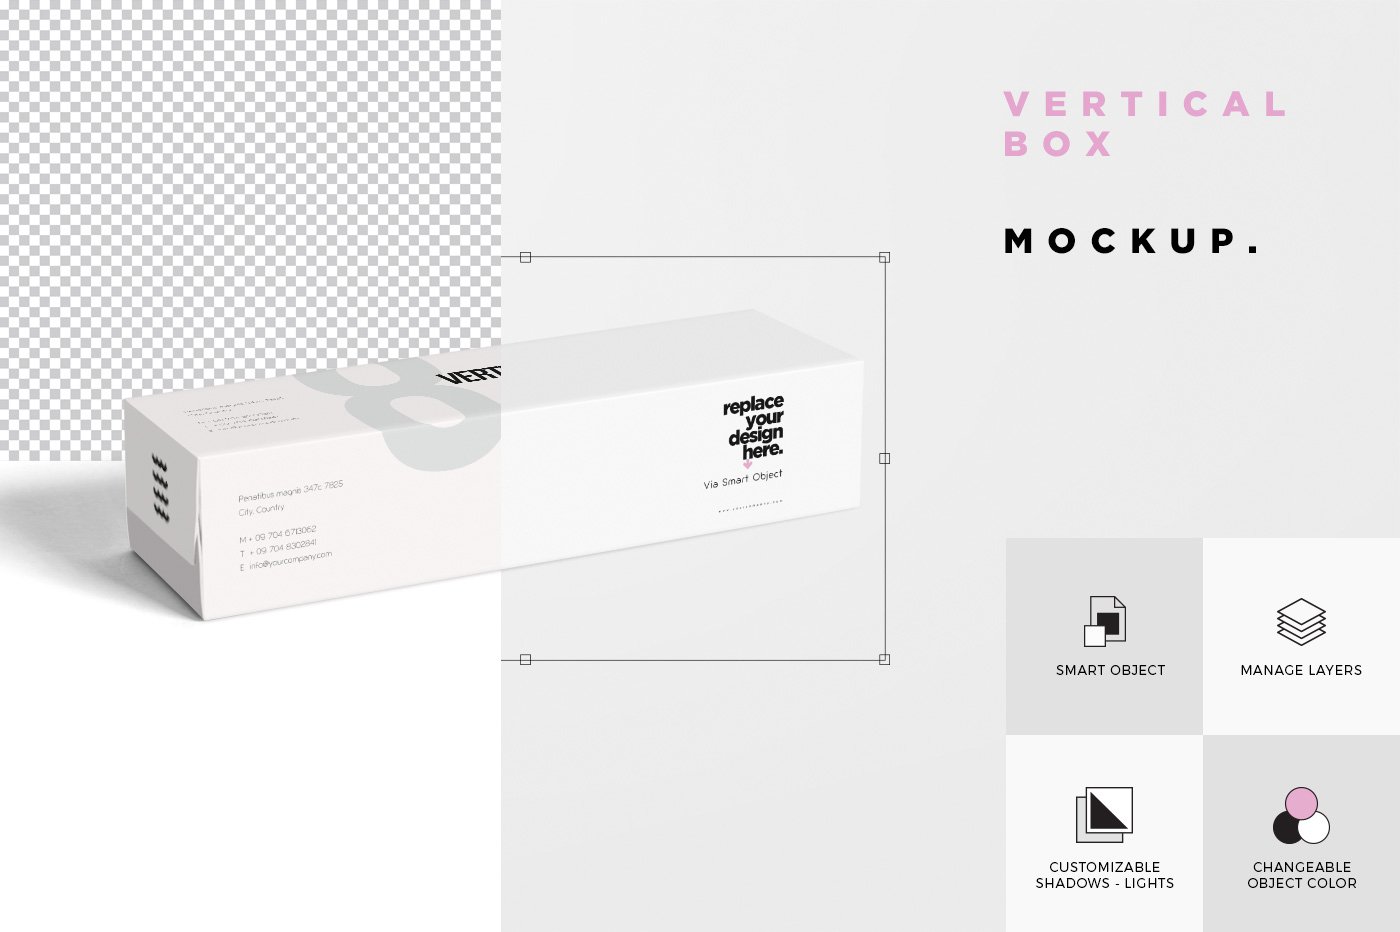 mockup features image 721